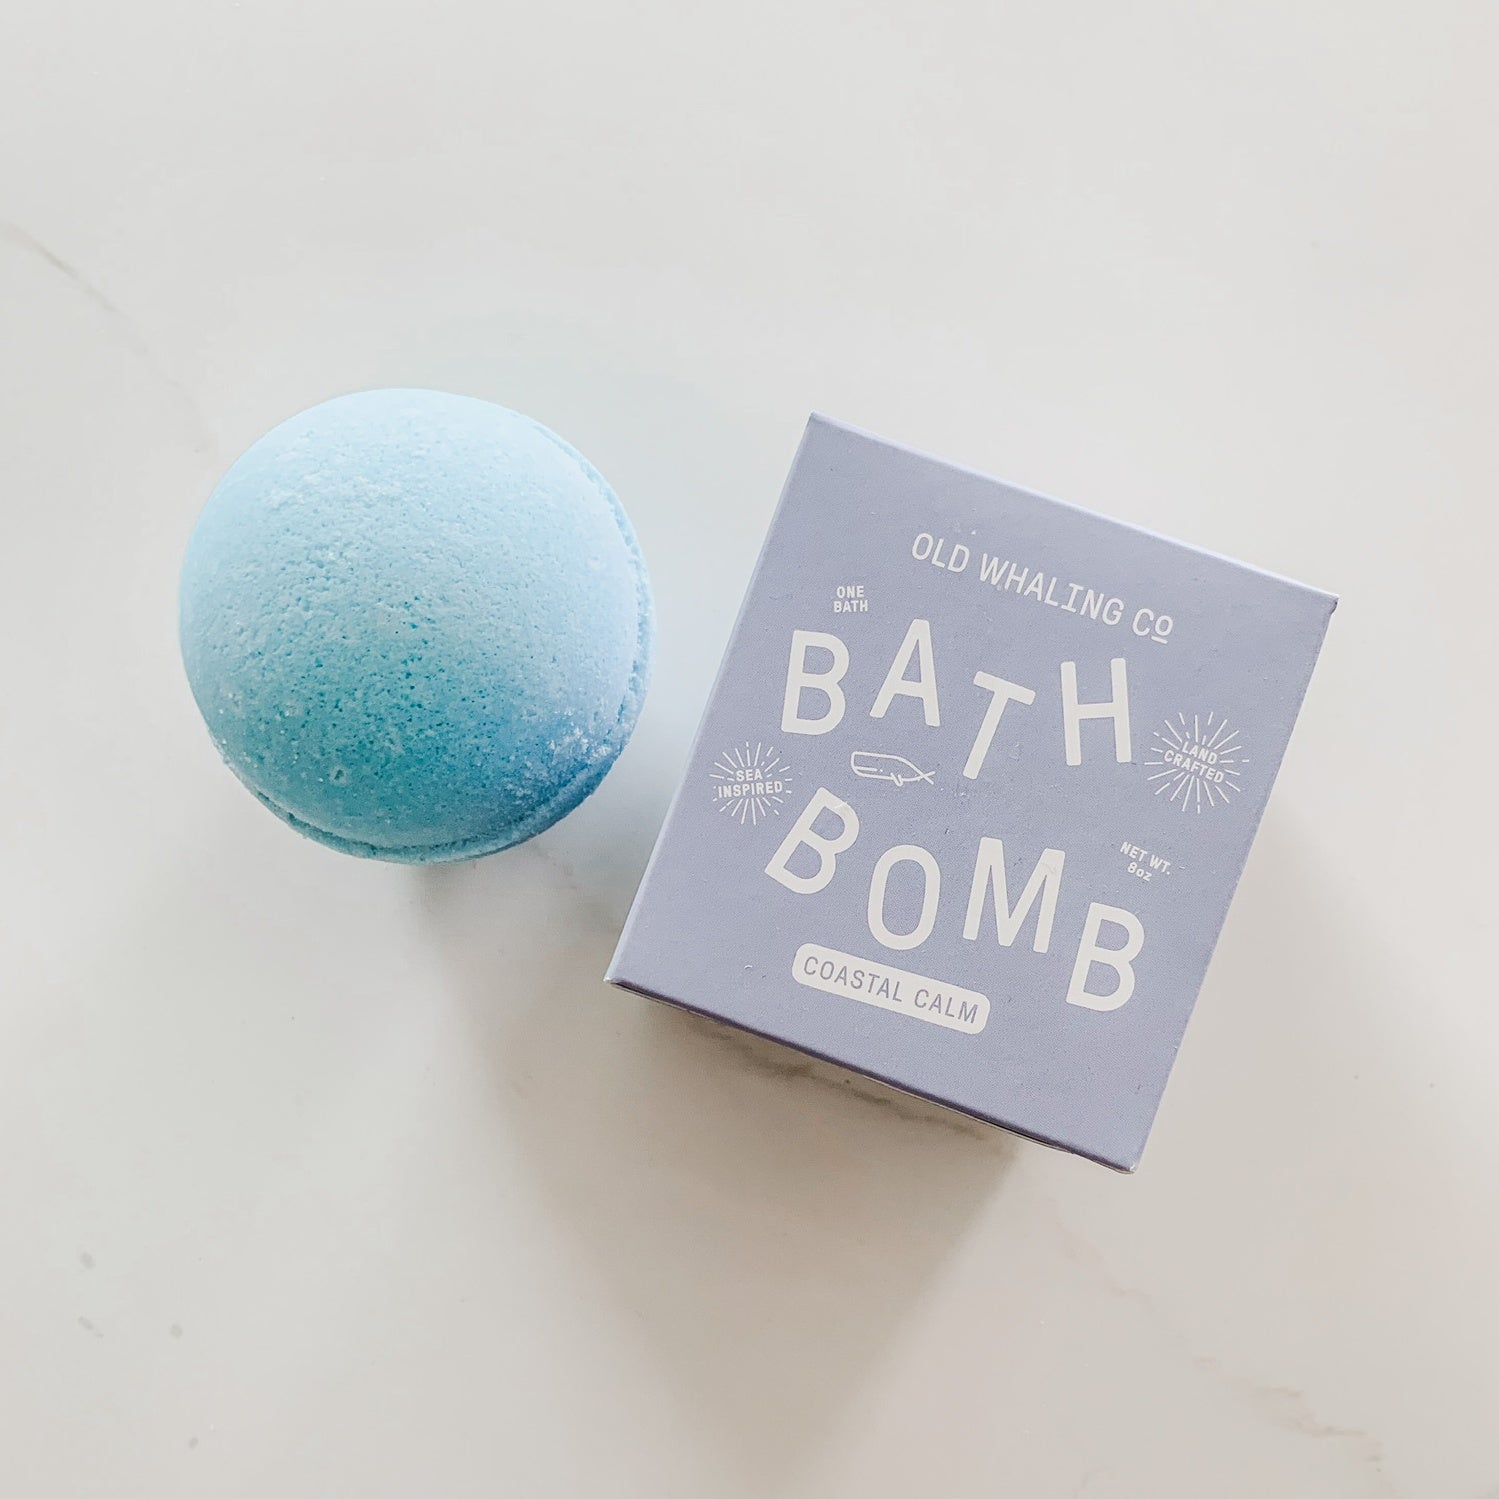 Blue bath bomb next to blue box with white text.